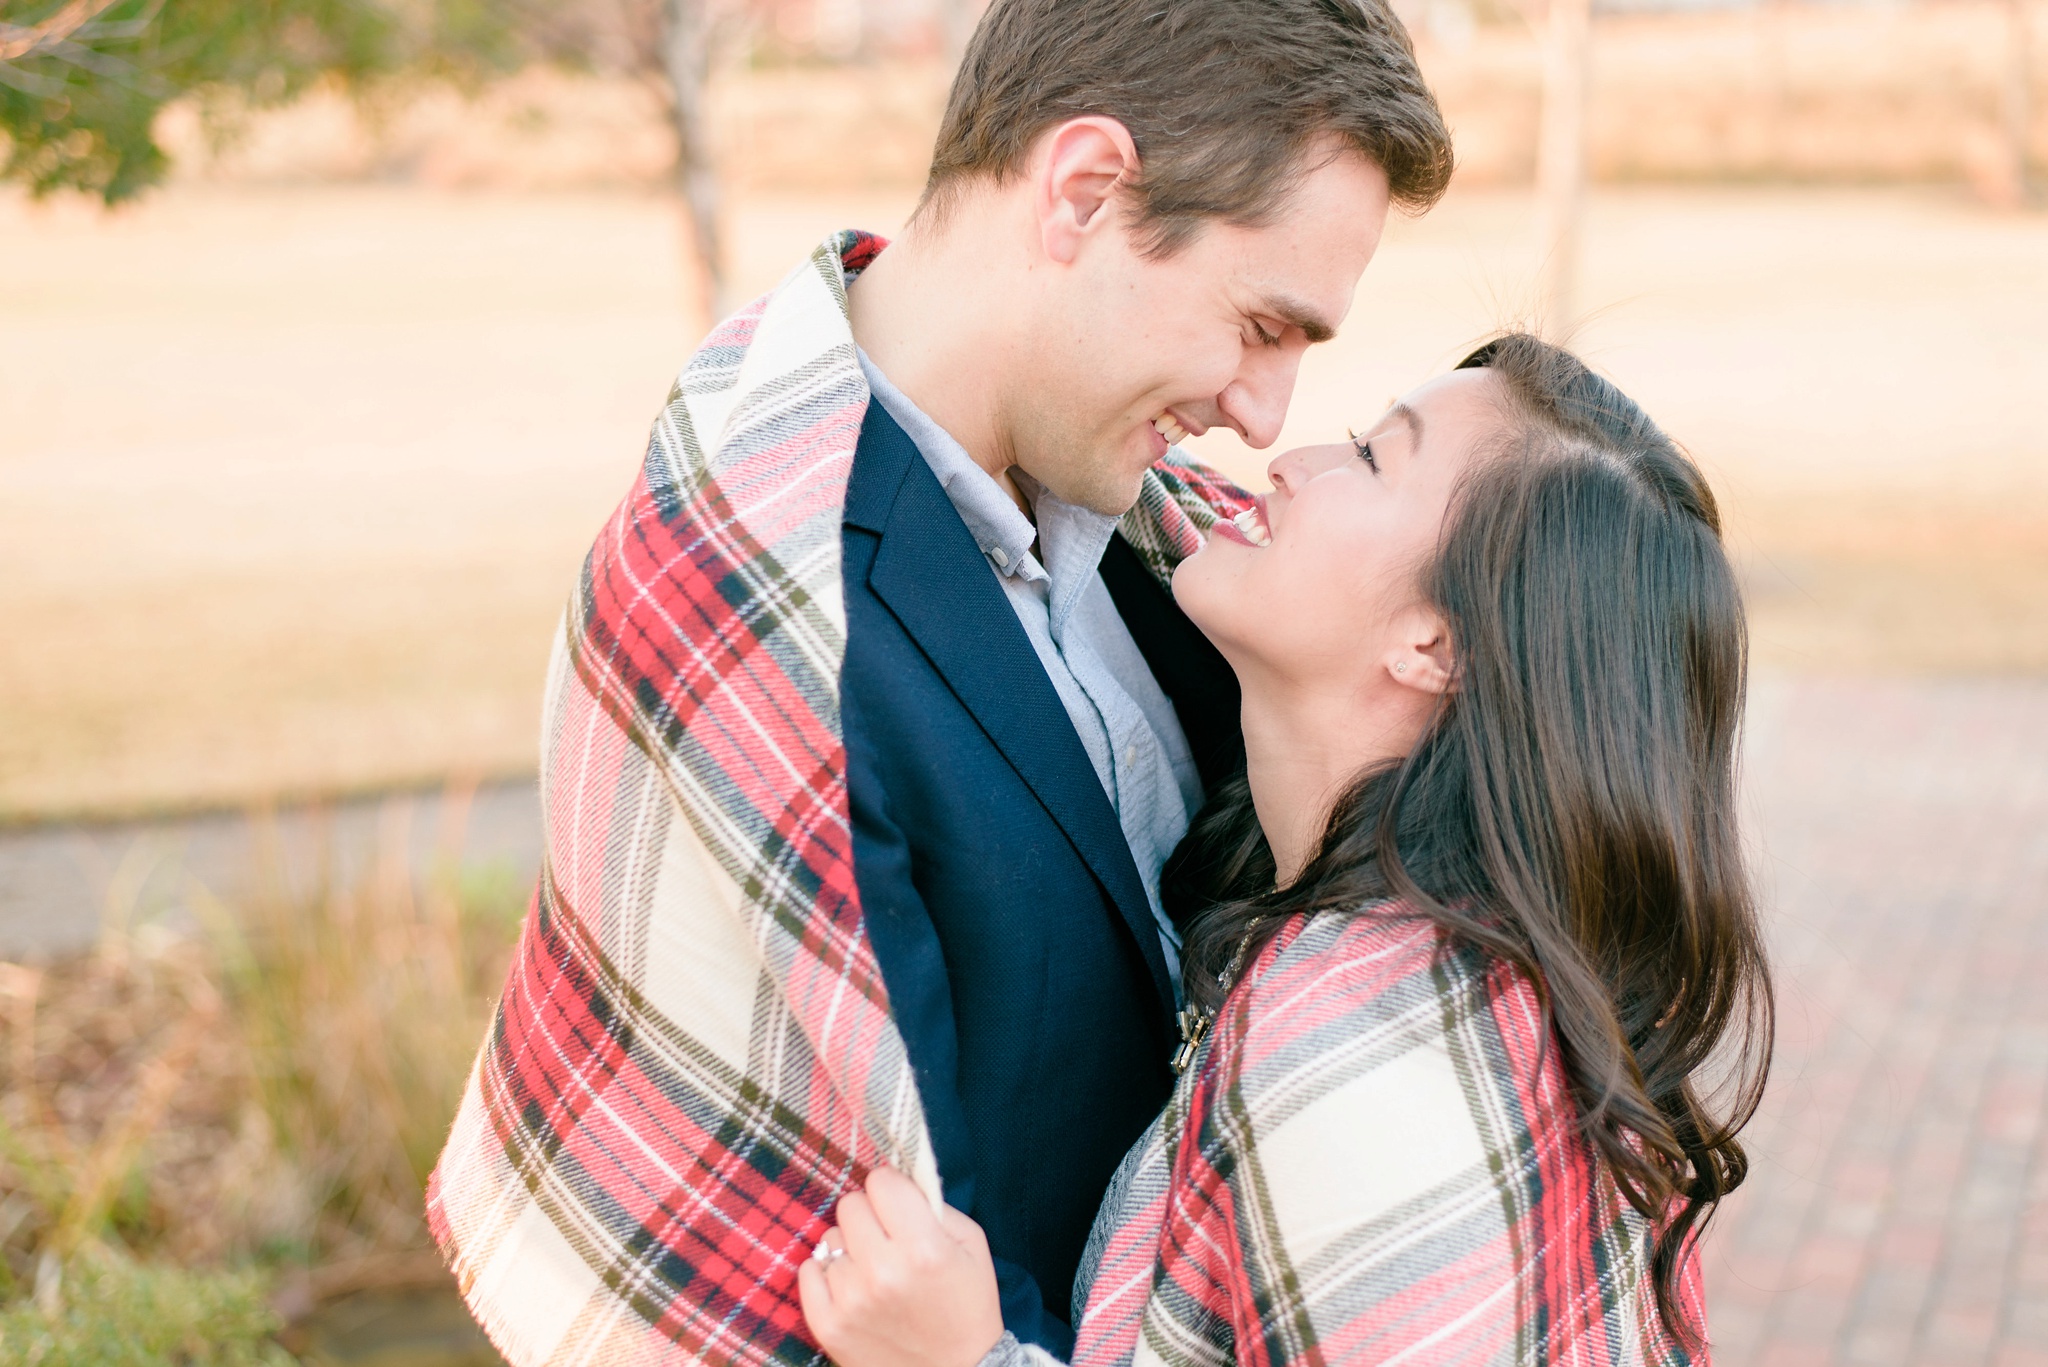 Downtown Nice to Have You in Birmingham Engagement Session| Birmingham Alabama Wedding Photographers_0020.jpg